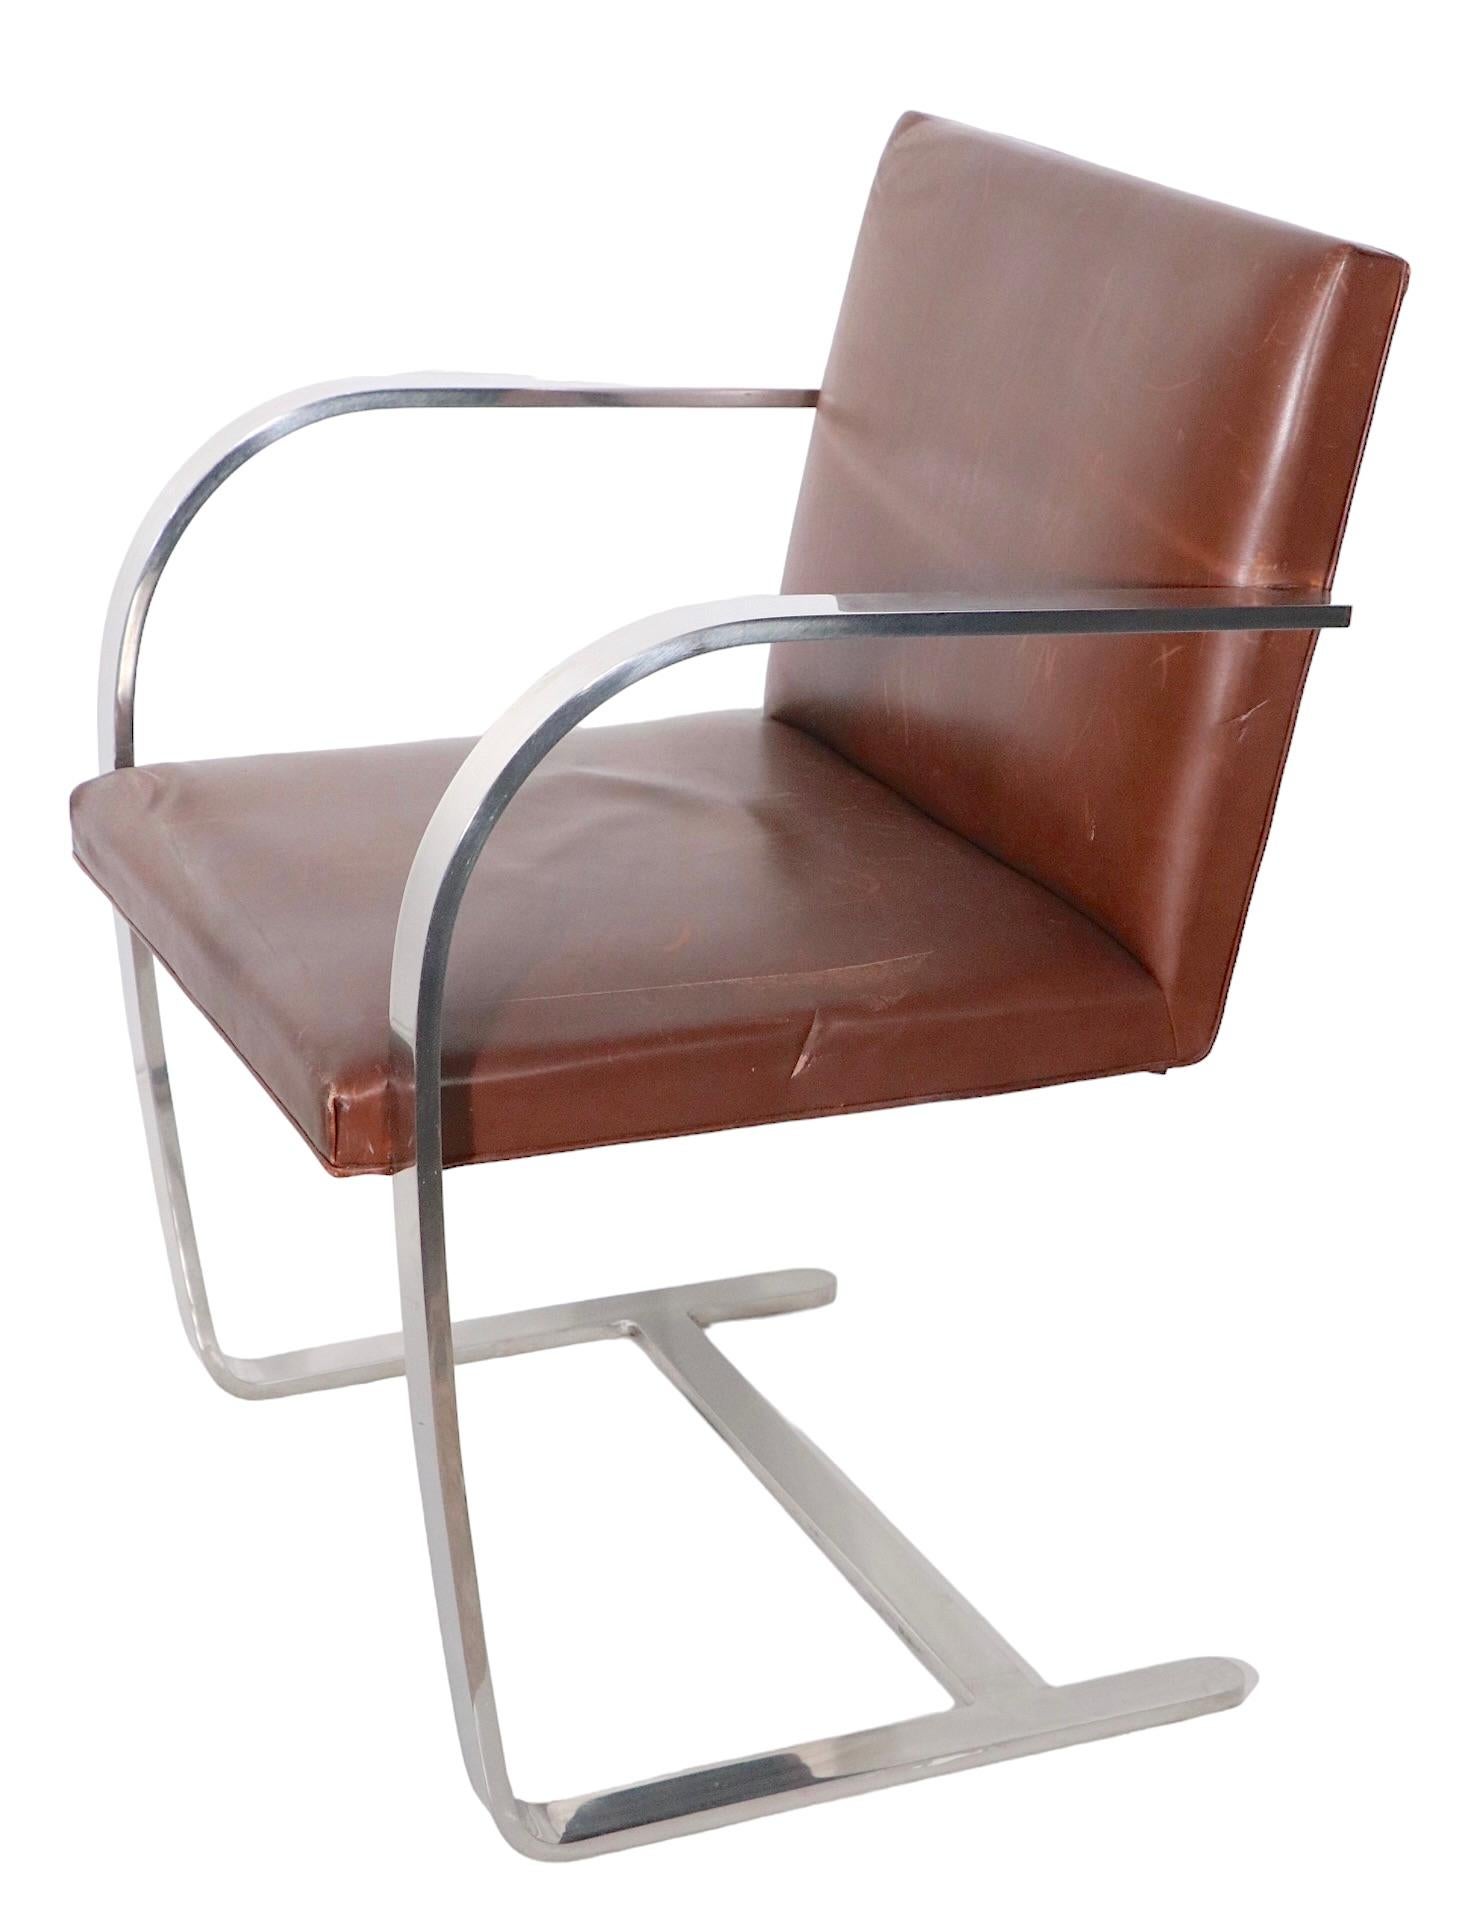 Pr. Meis Van Der Rohe Designed Brno Chairs by Knoll in Brown Leather 8